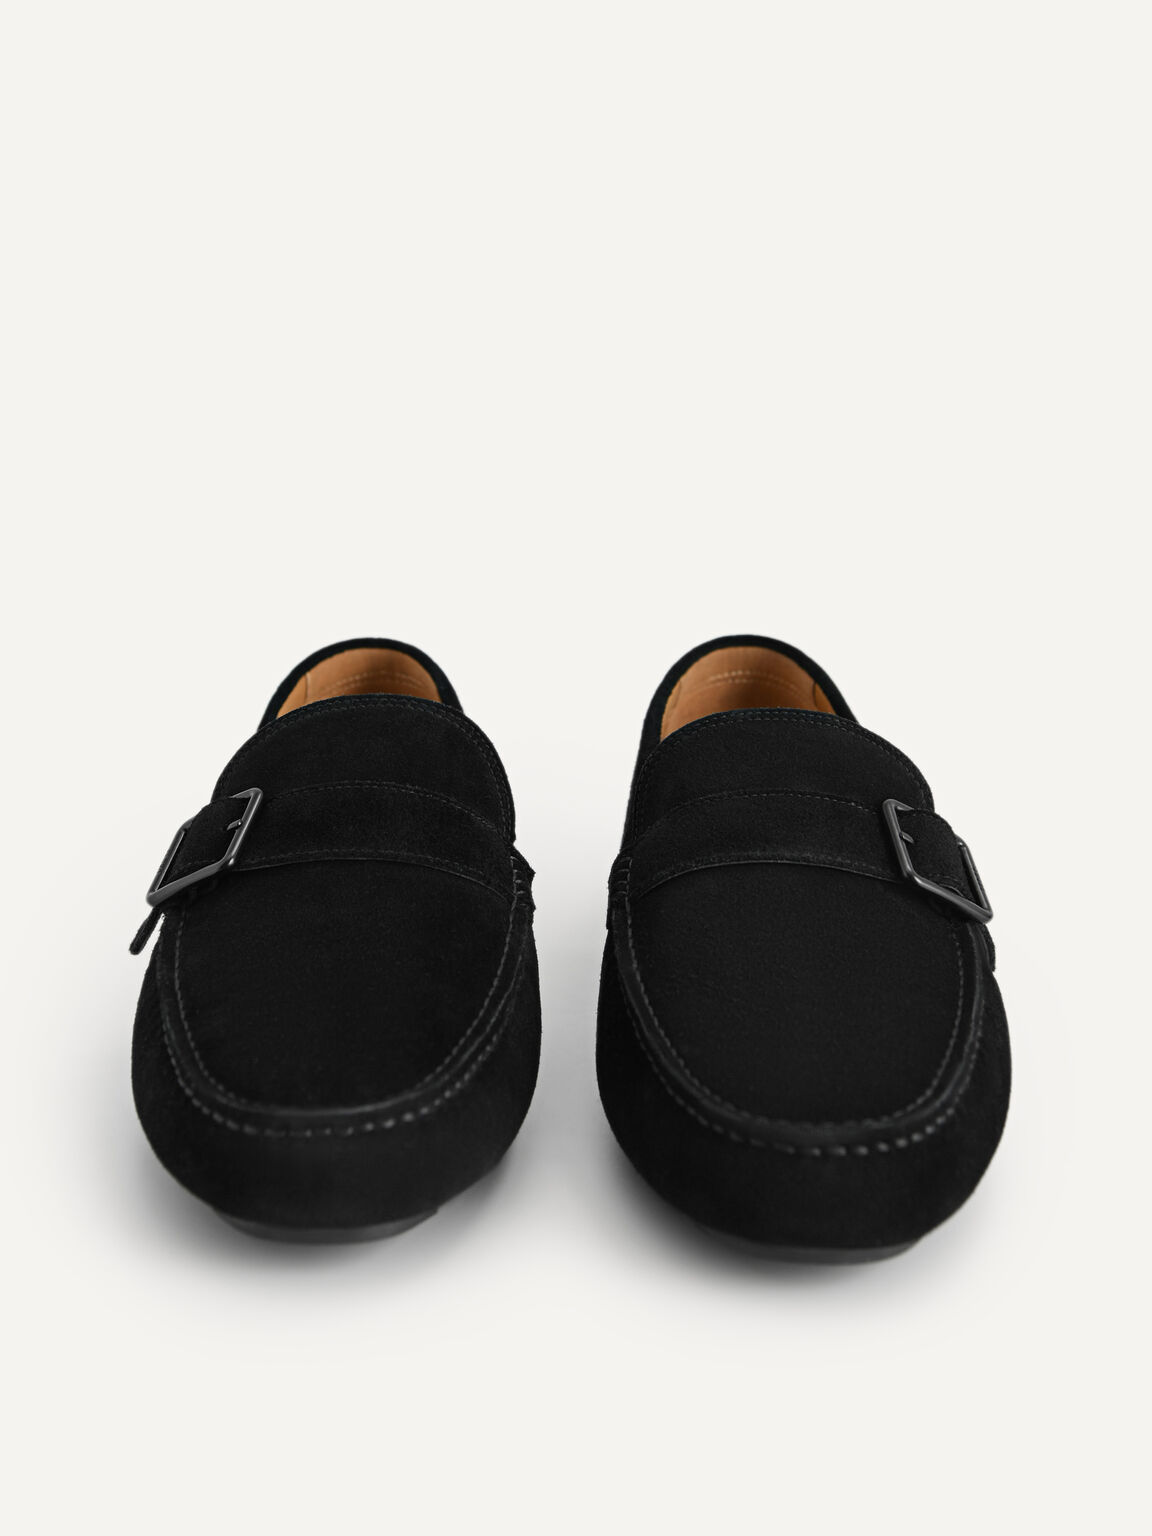 Suede Leather Moccasins with Buckle Detailing, Black